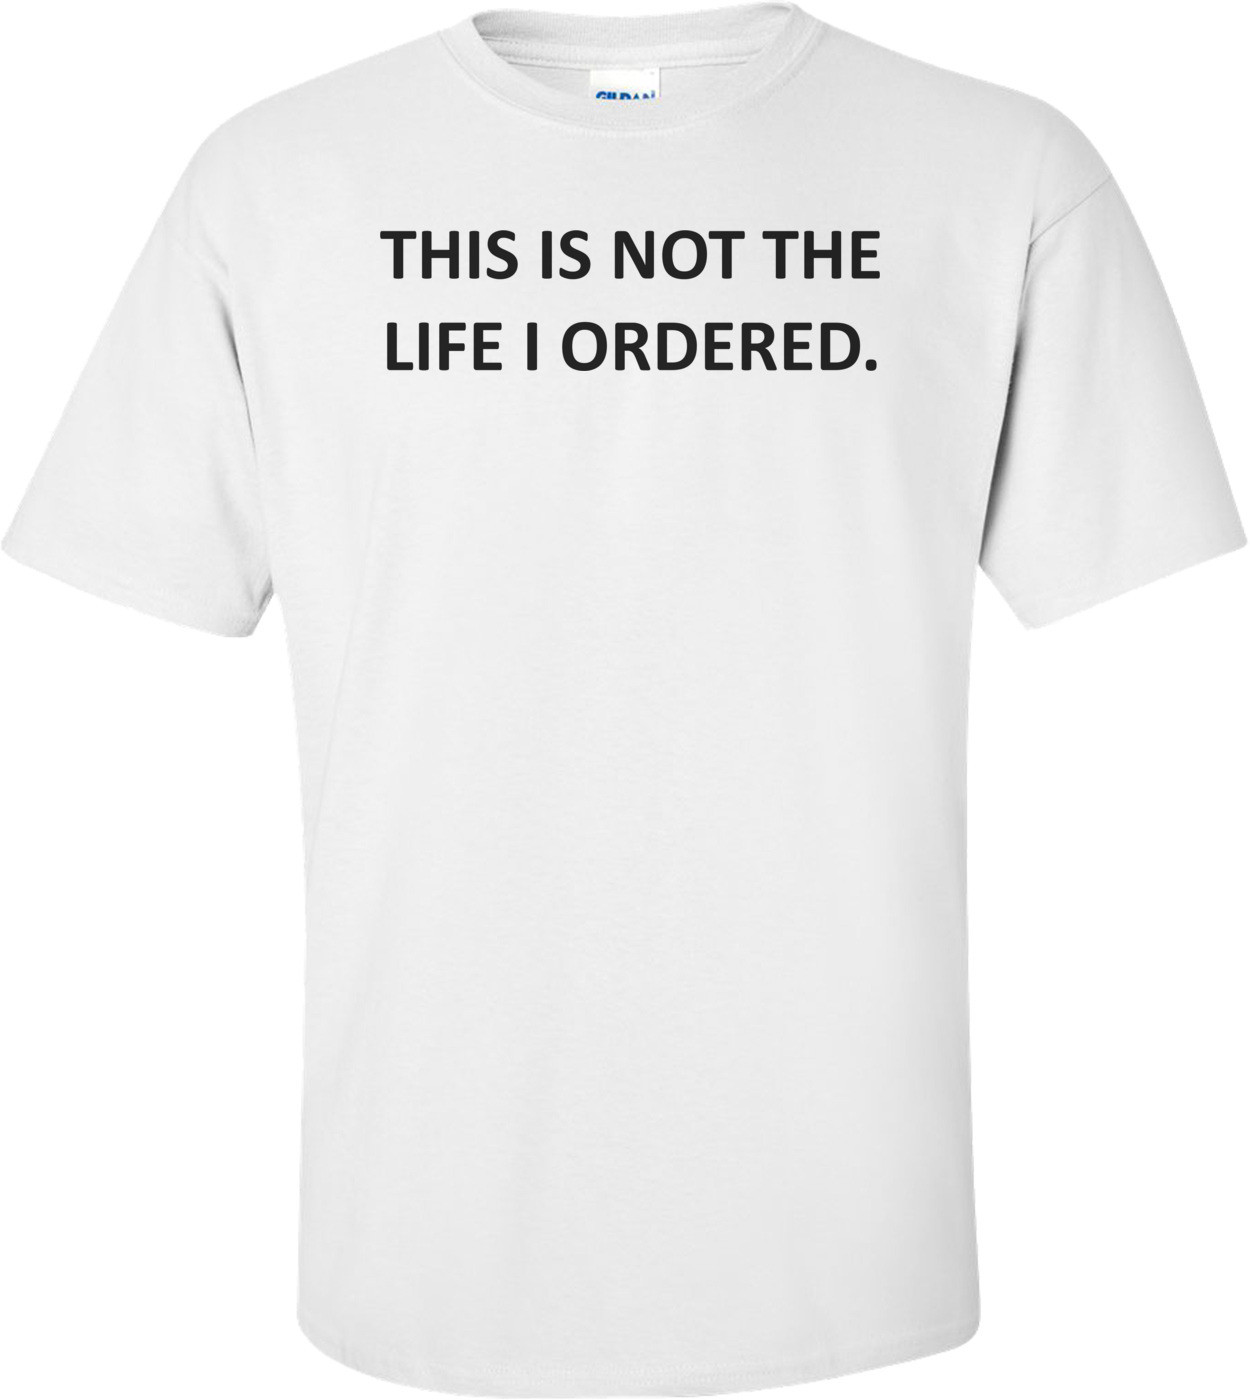 THIS IS NOT THE LIFE I ORDERED. Shirt